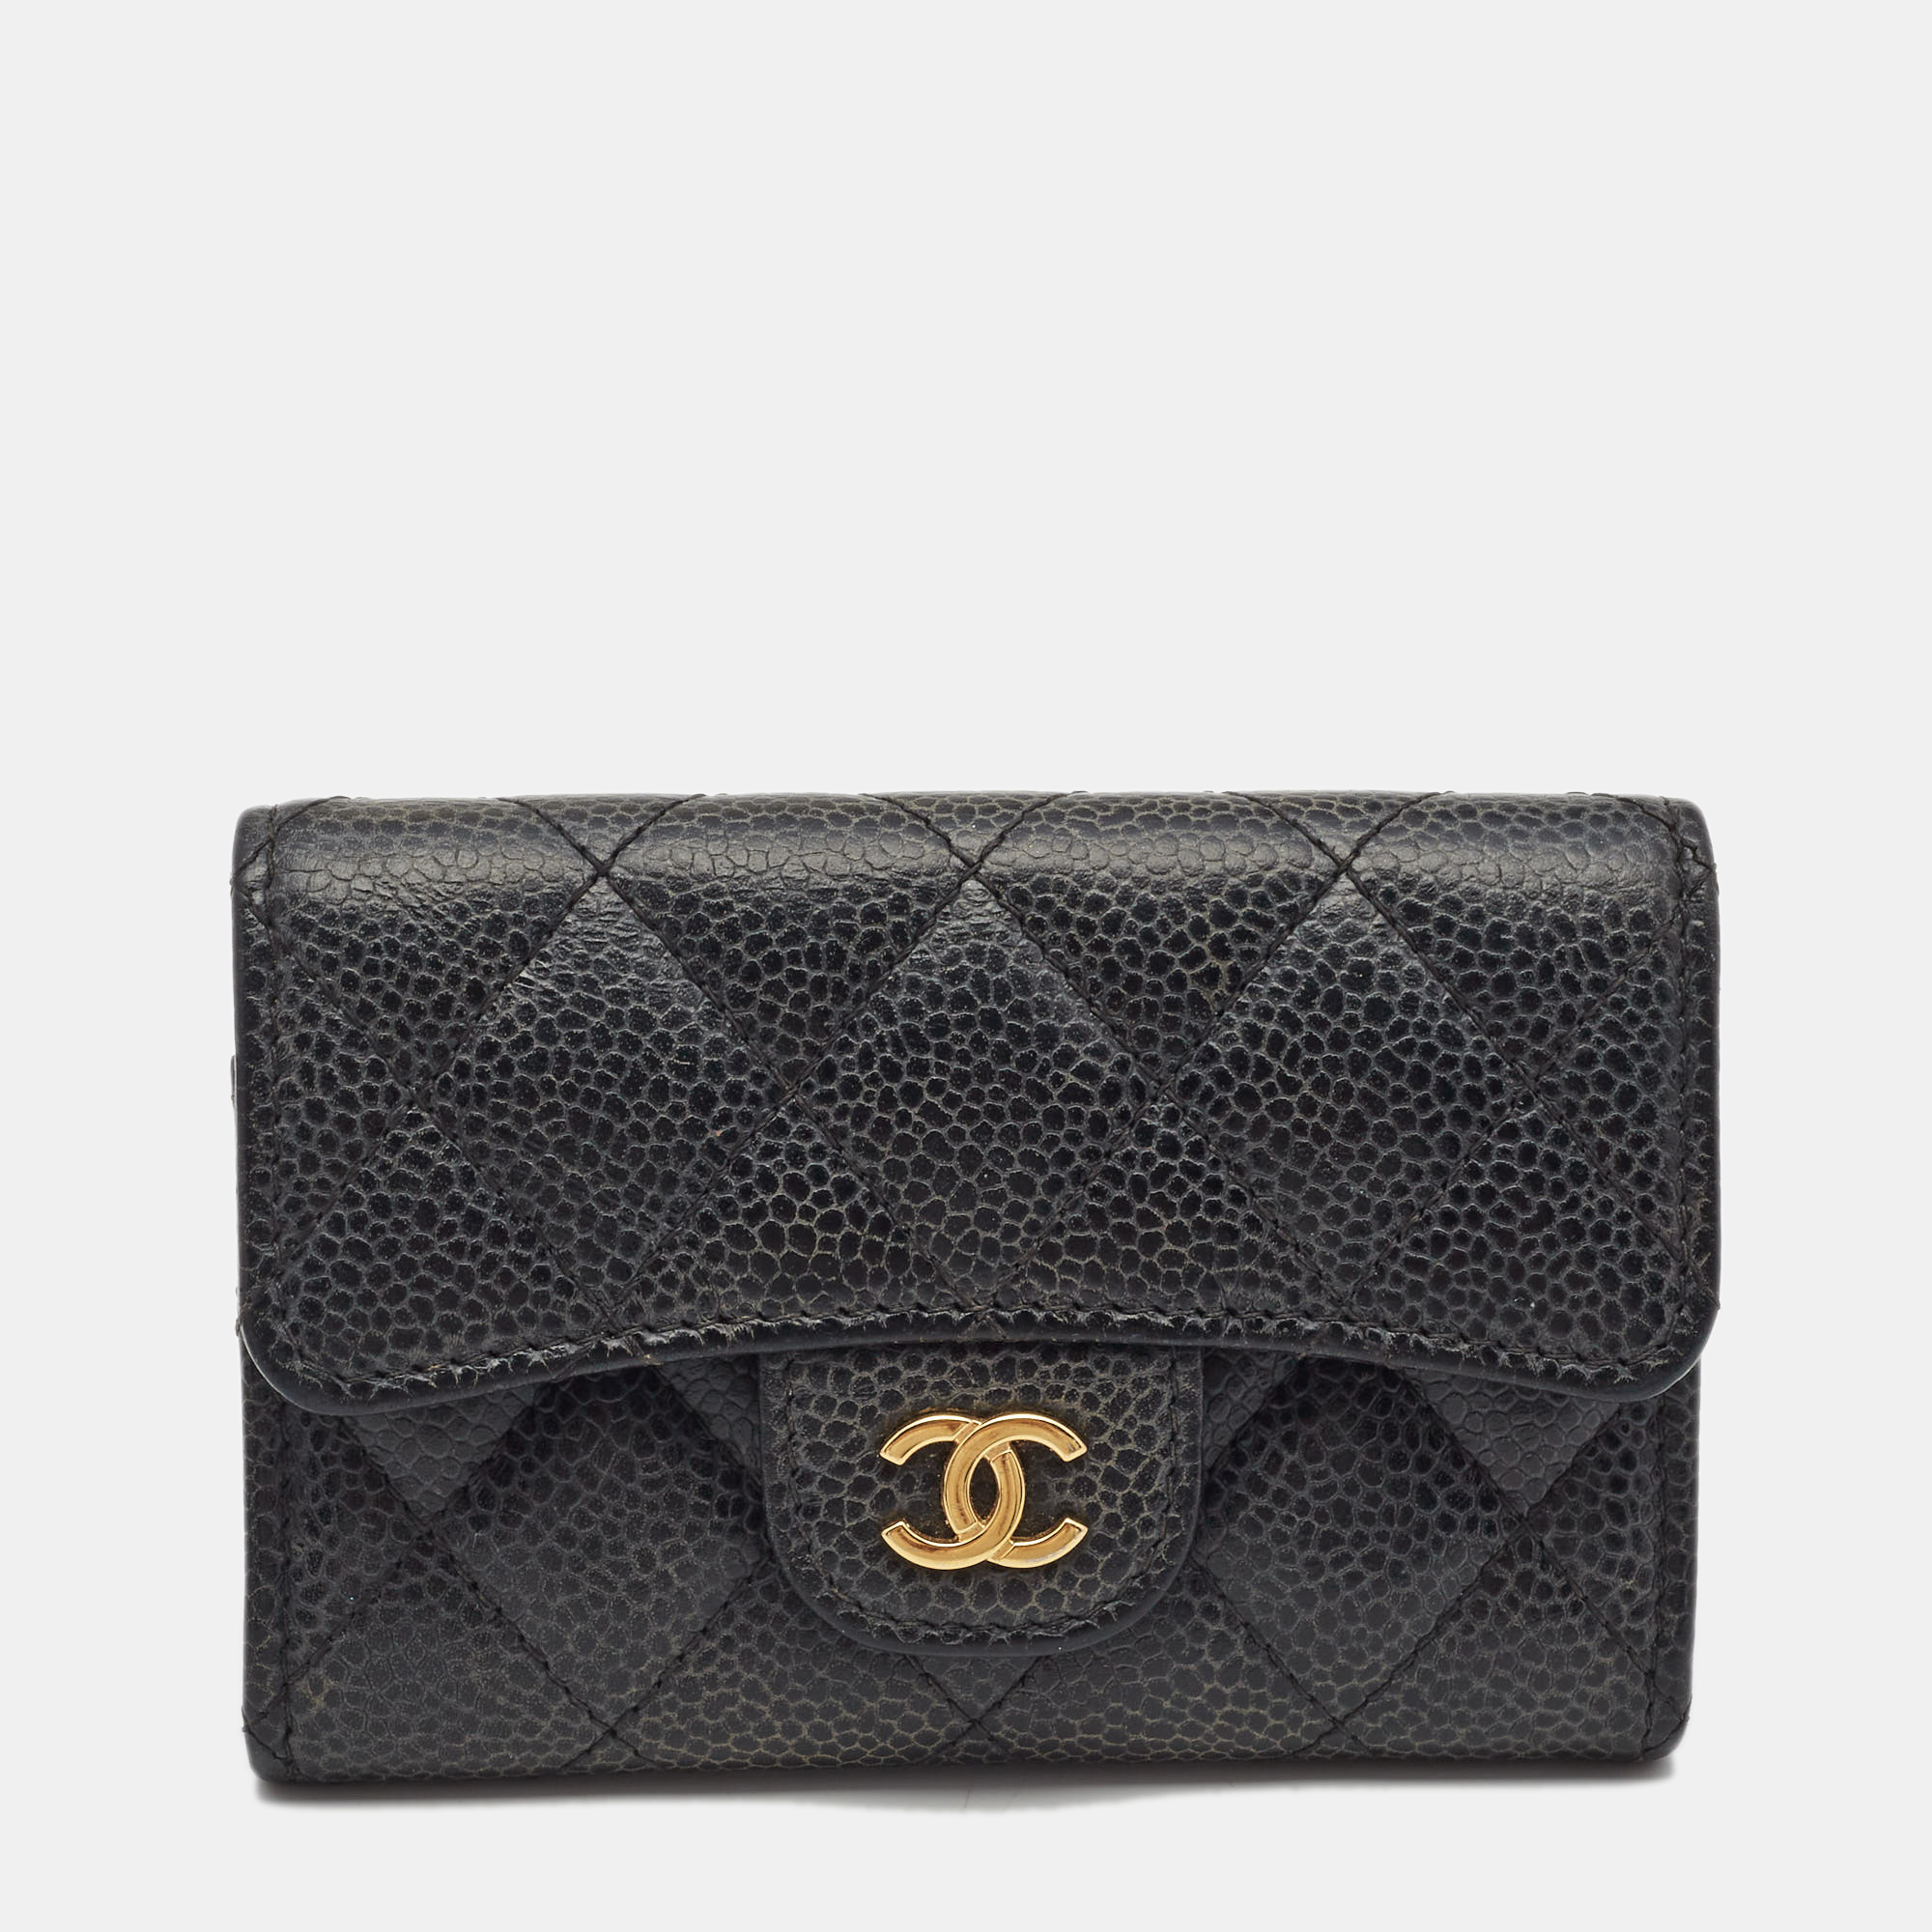 Pre-owned Chanel Black Caviar Leather Classic Flap Card Case